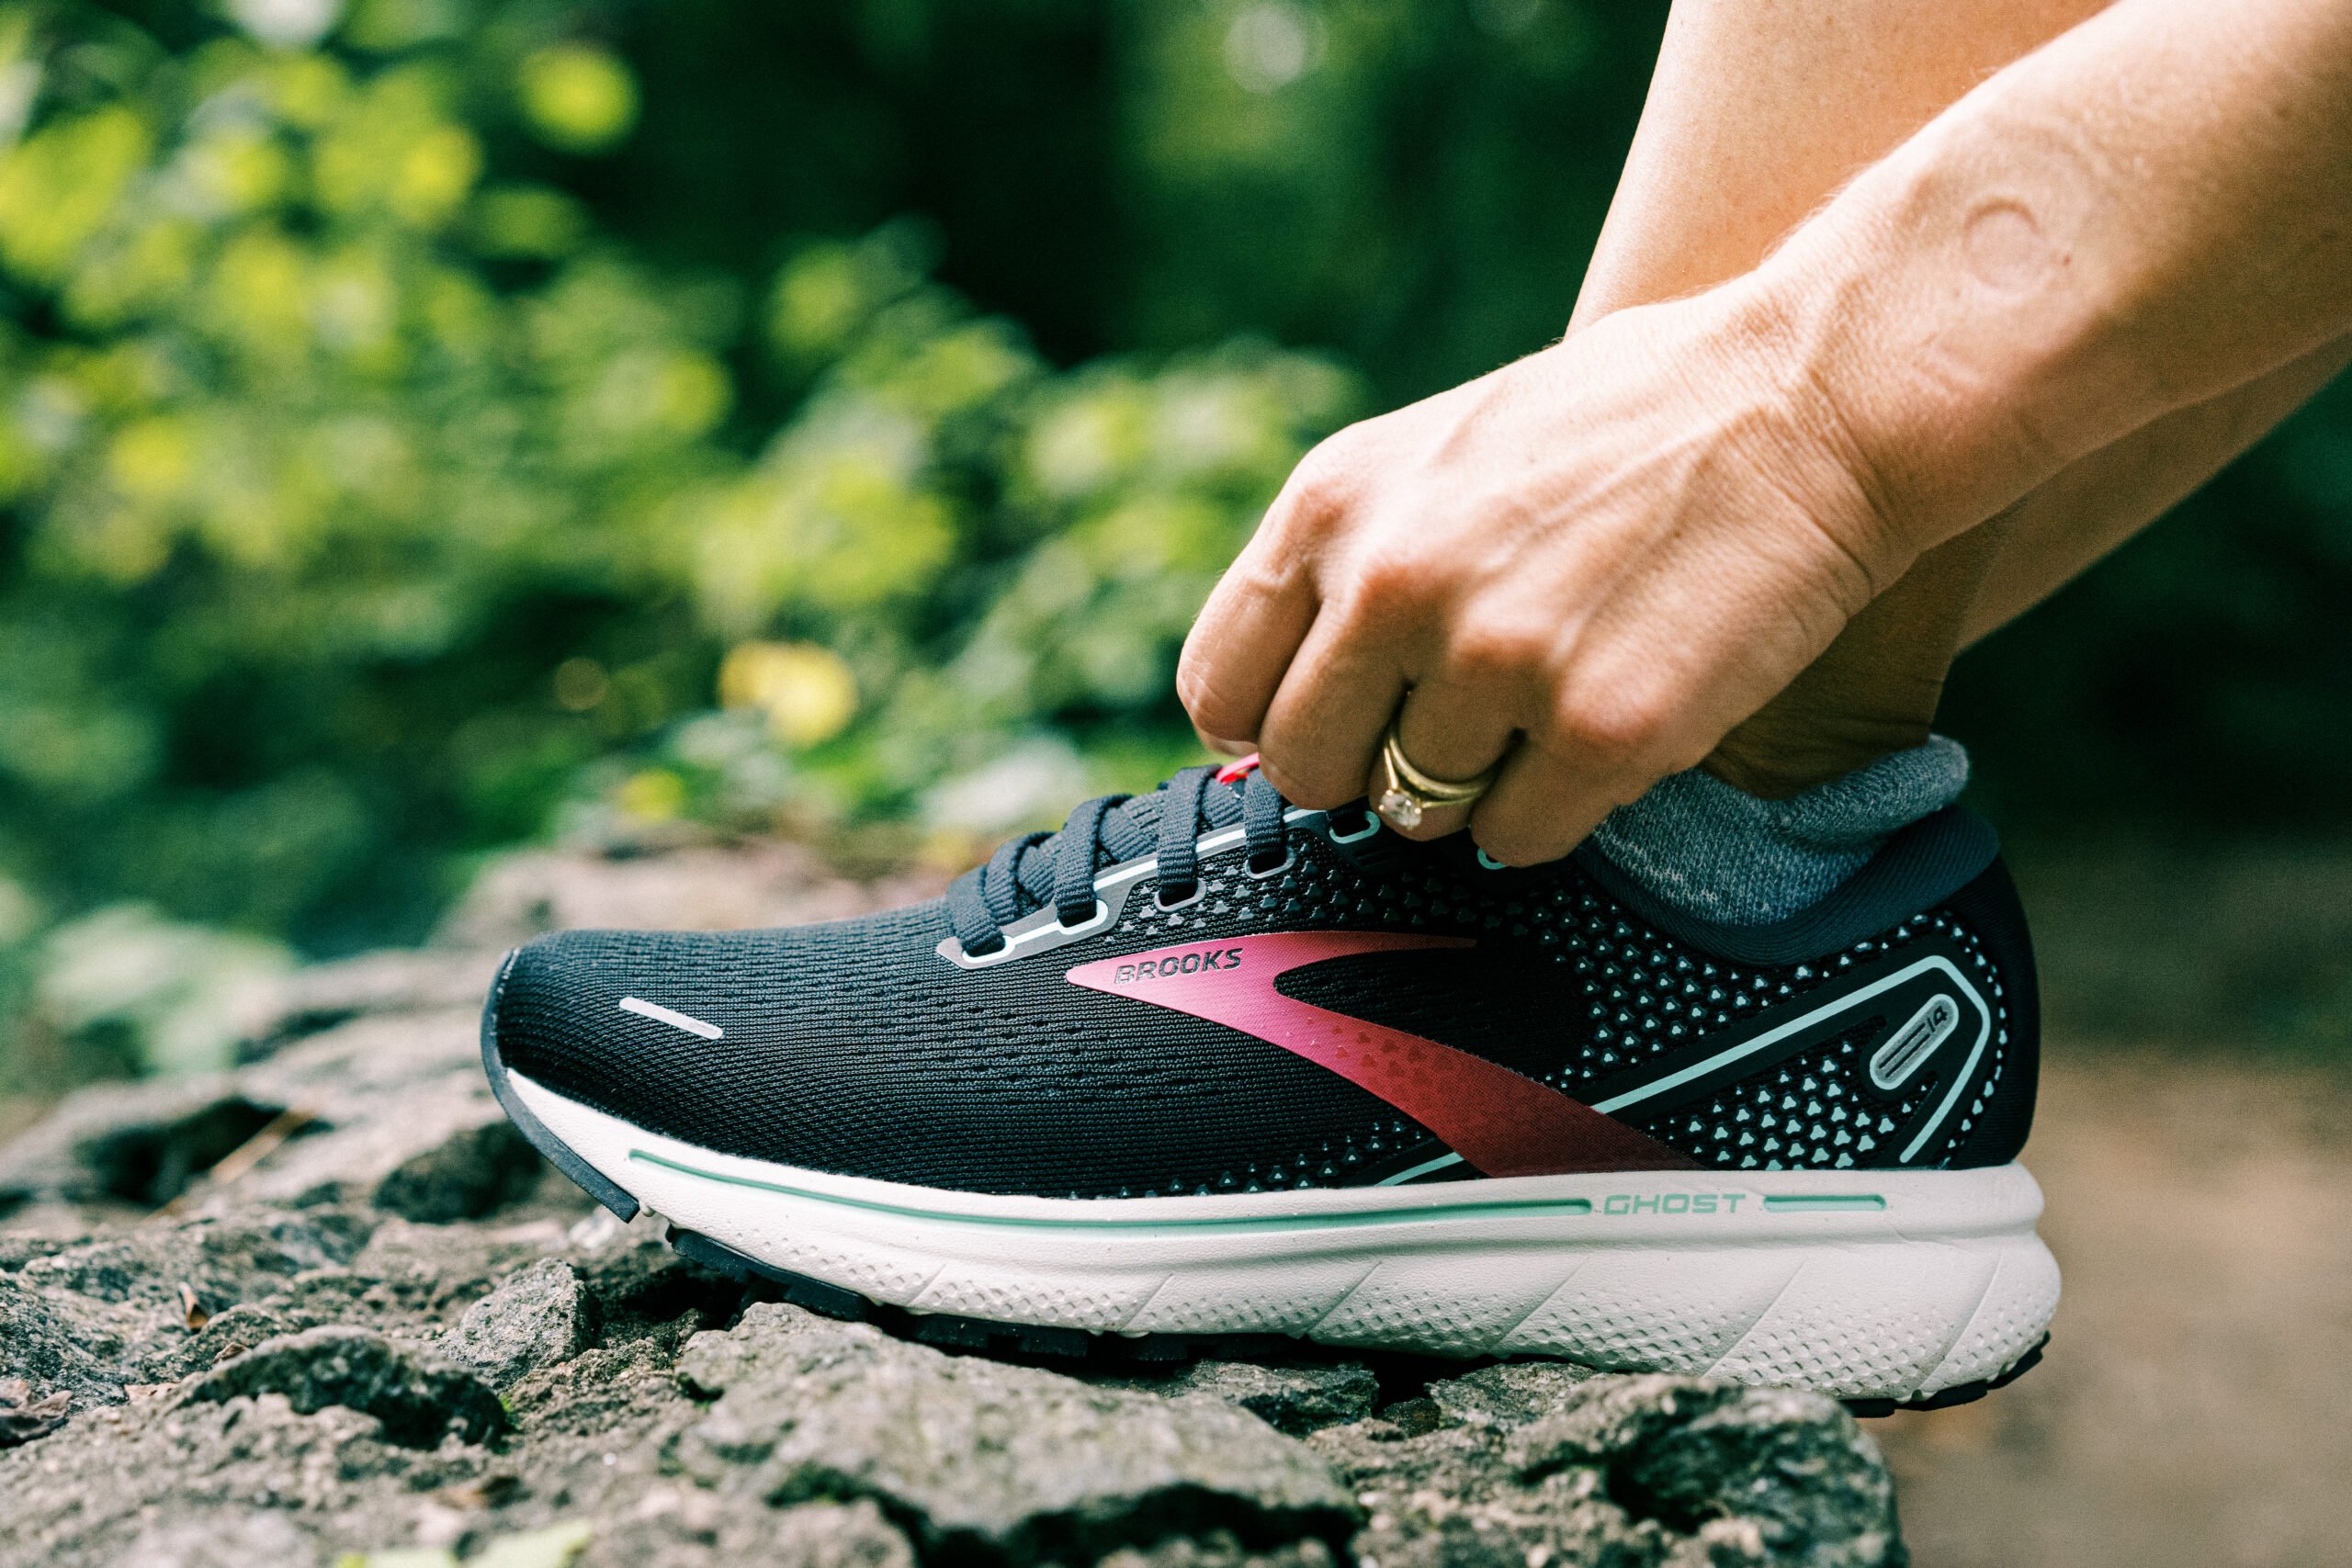 Brooks Ghost Review - comfort